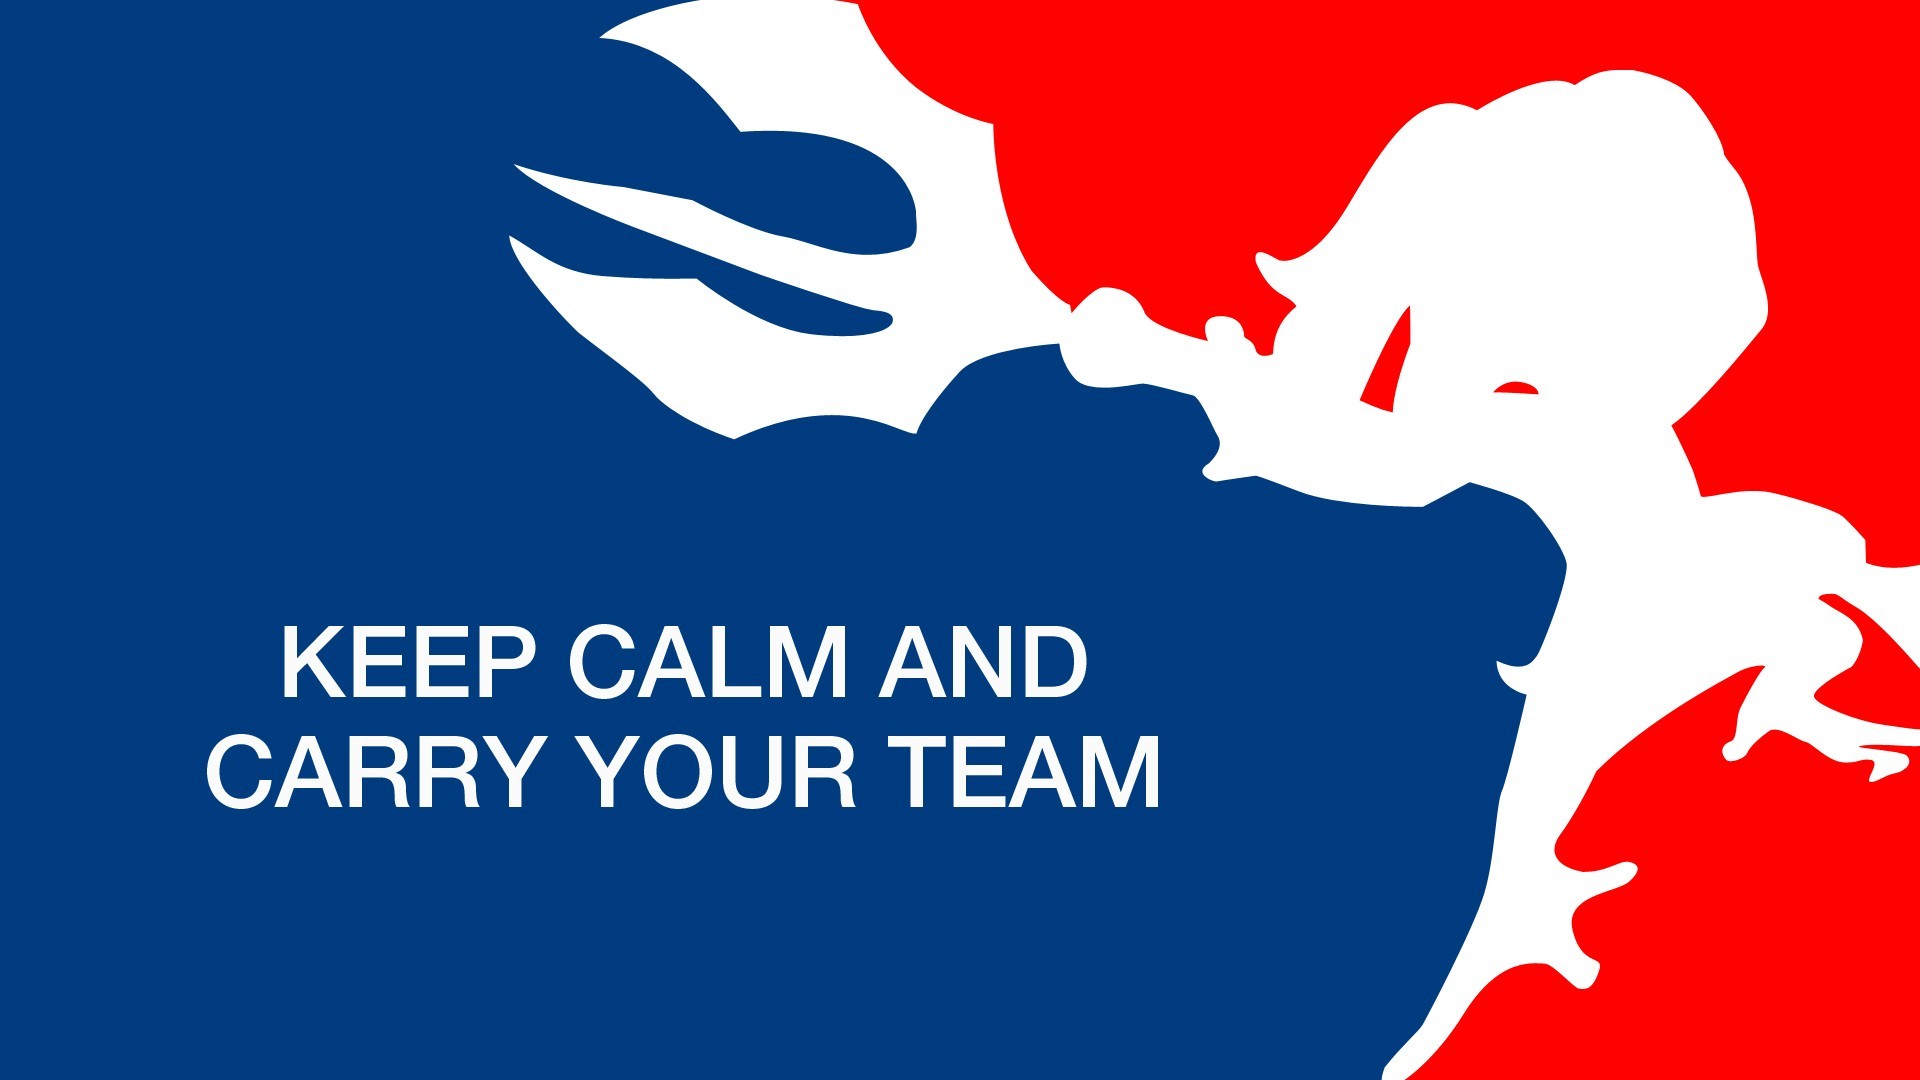 Video Games Keep Calm And League Of Legends Text Typography 1920x1080